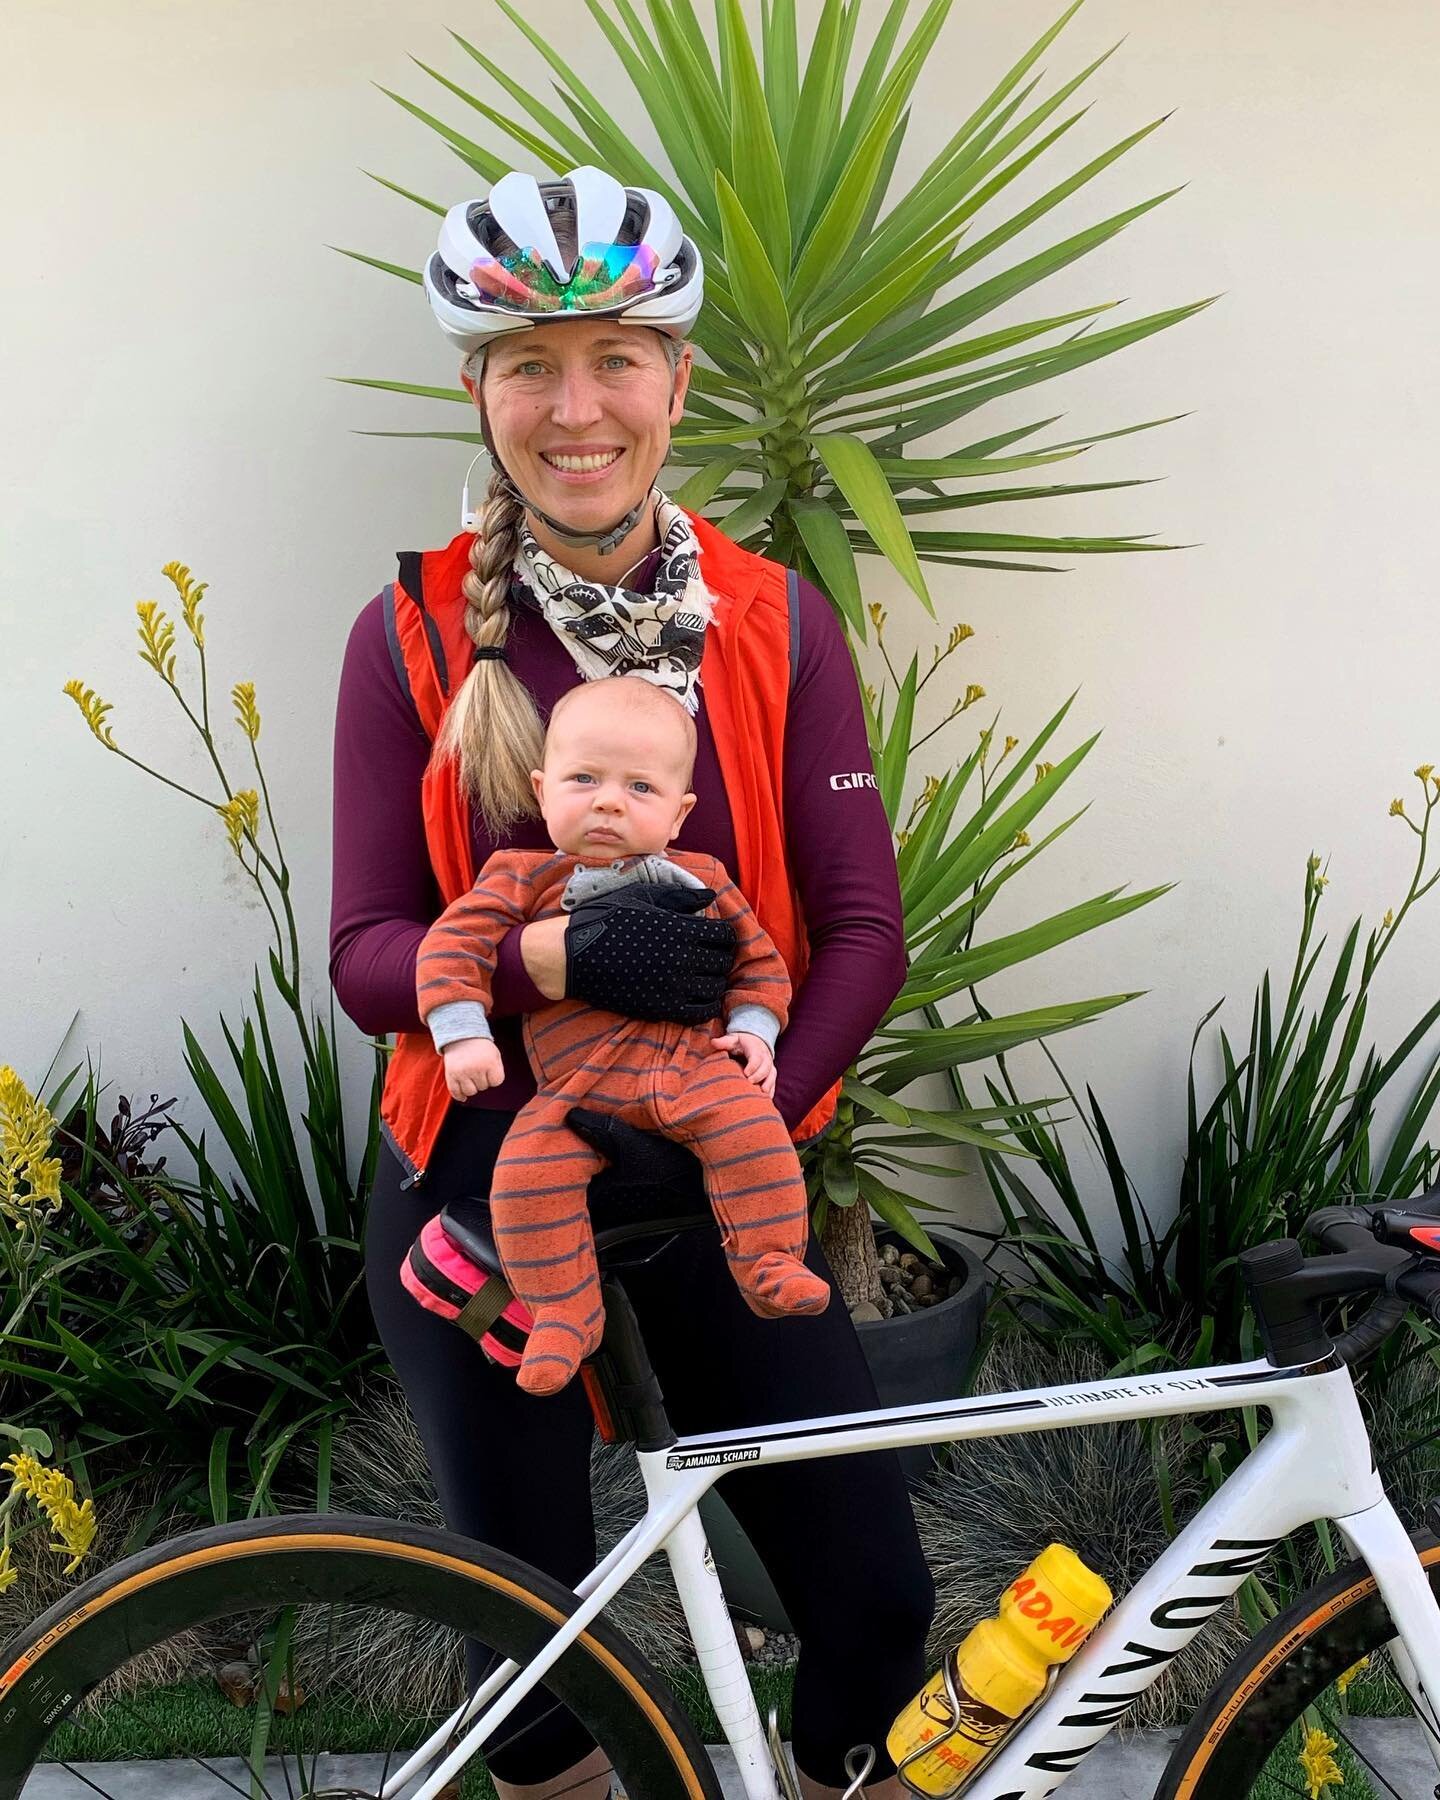 After staying on the bike during almost all of her pregnancy, @amandajochapin is figuring out how to keep rolling now that Parker has joined the family. She says, &ldquo;my relationship to the bike has changed a bit, and right now I&rsquo;m not ridin